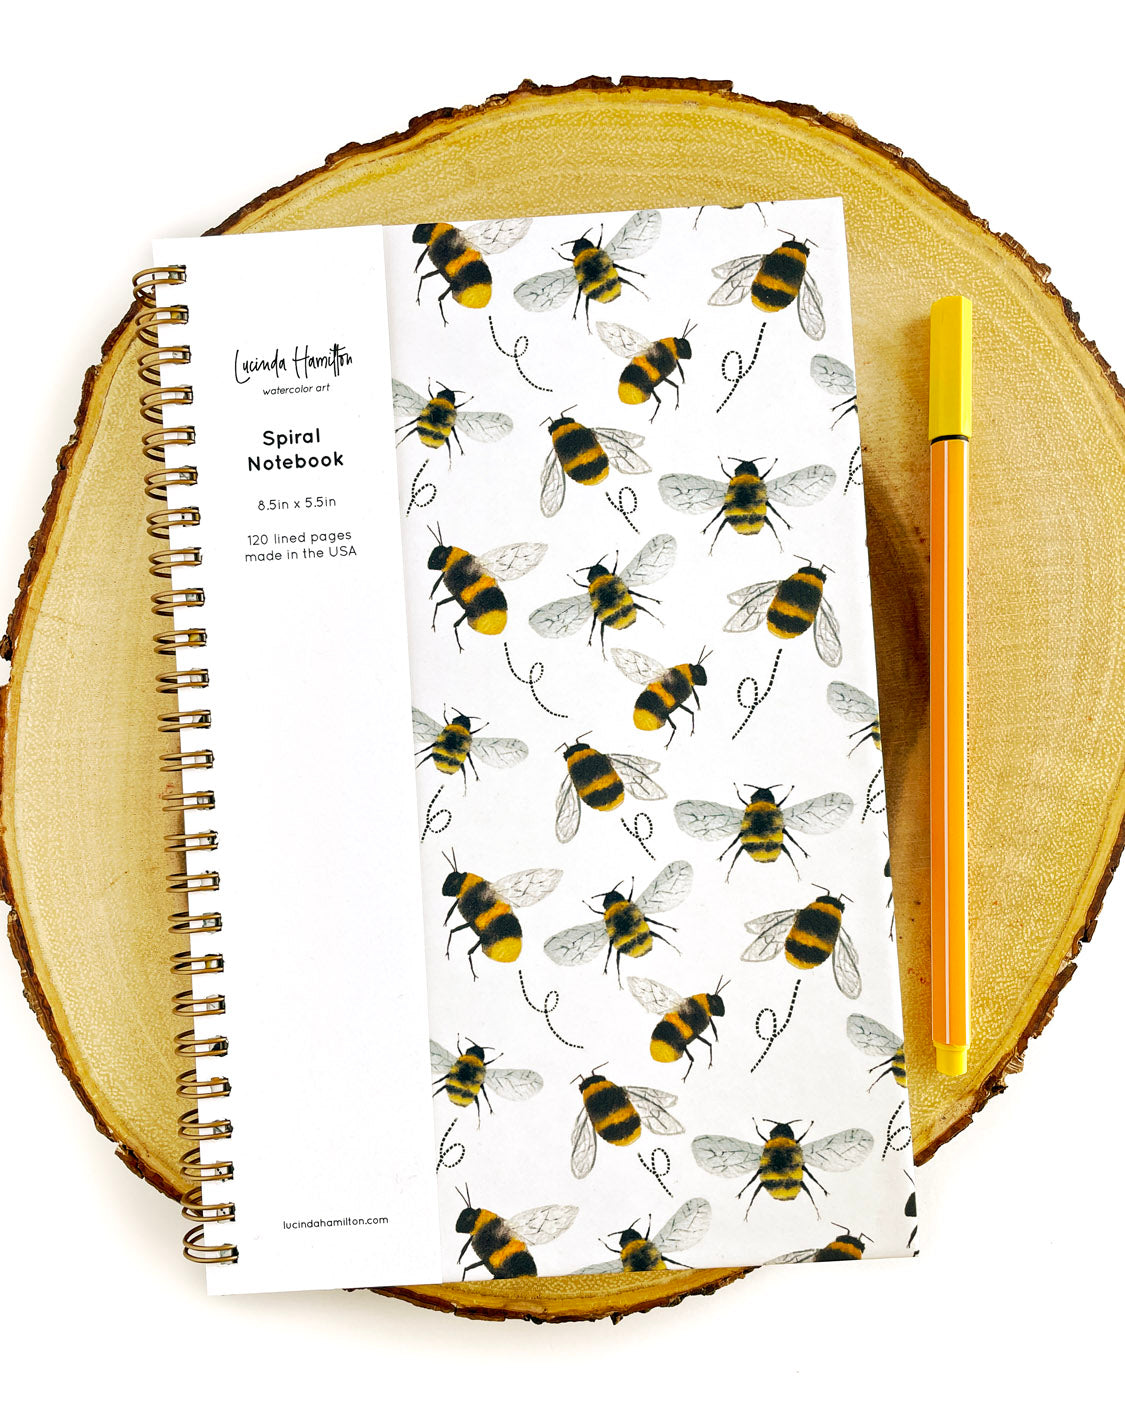 Bumble Bee Buzz Hard Cover Spiral Notebook